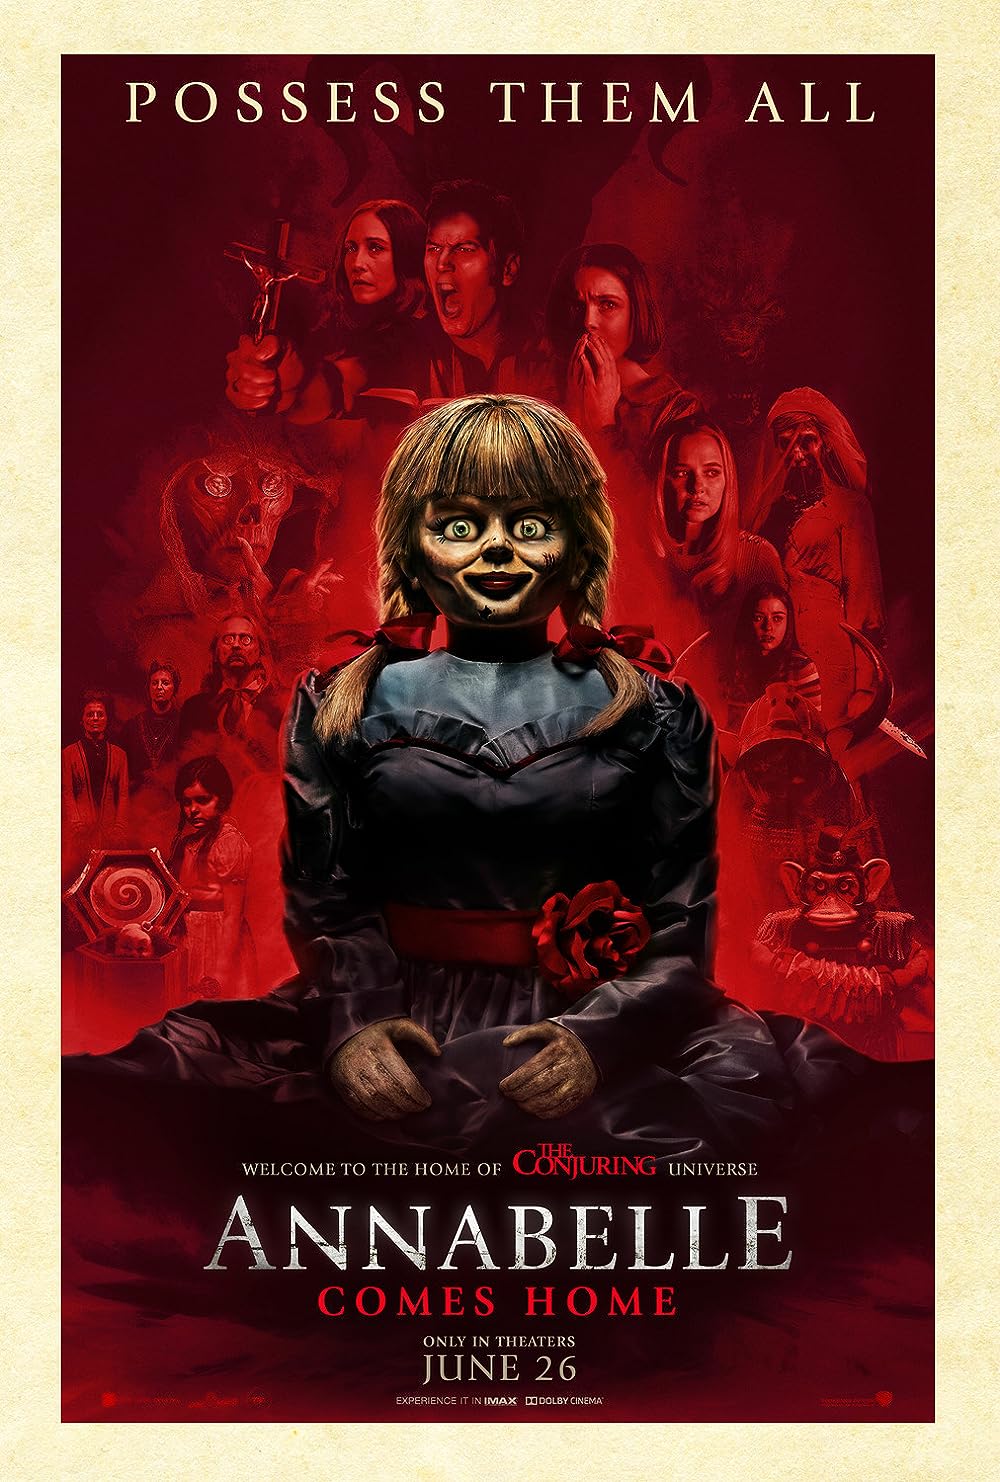 FULL MOVIE: Annabelle Comes Home (2019)